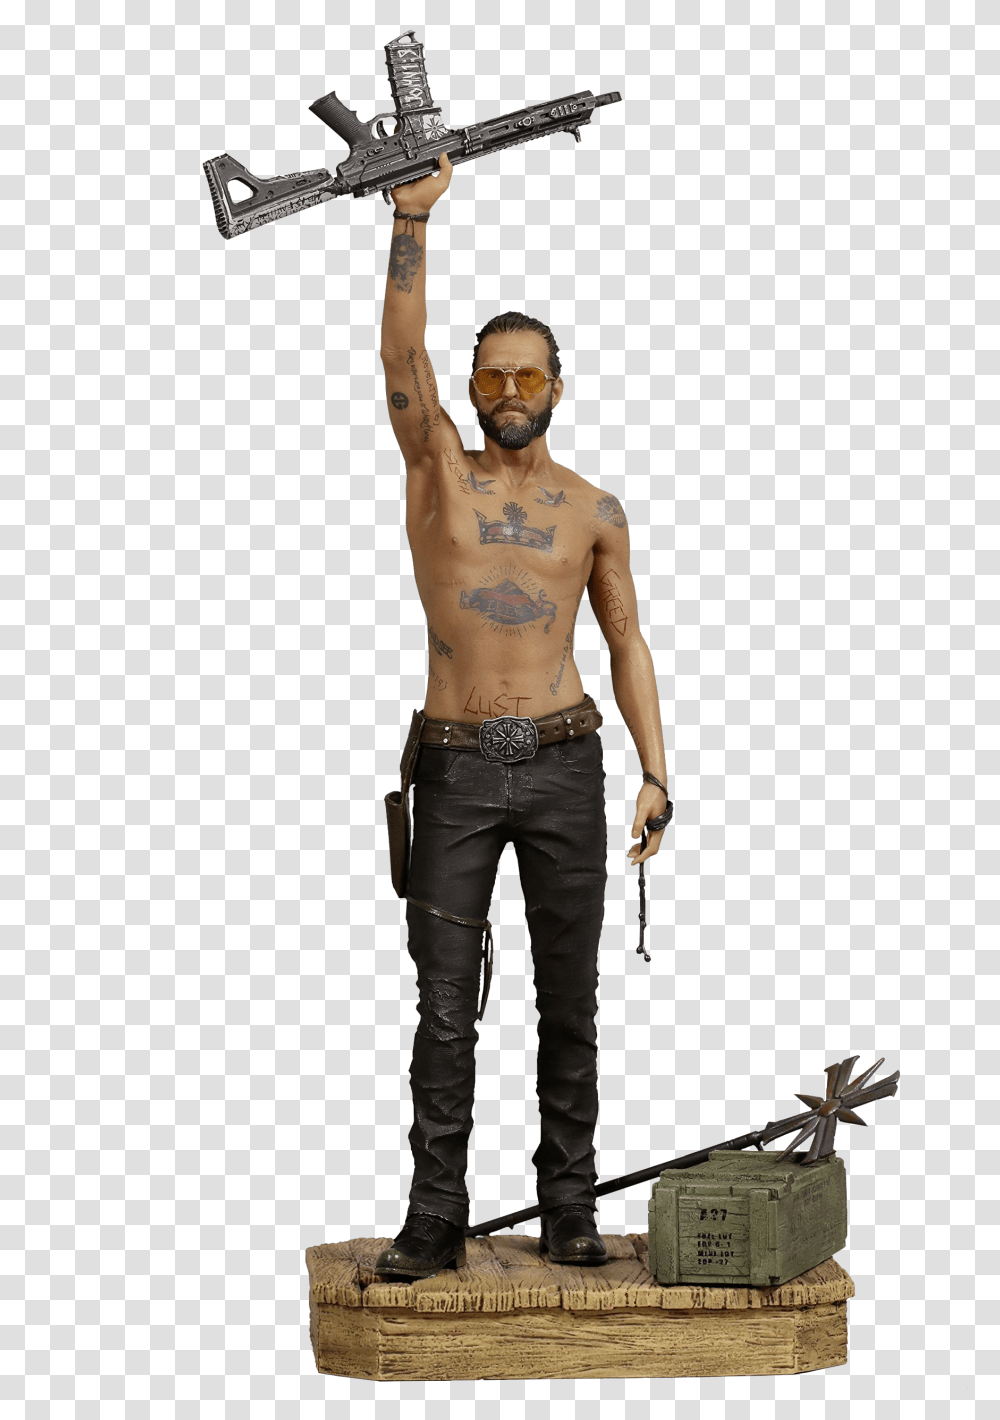 Far Cry 4 Far Cry 5 Joseph Seed Model, Skin, Person, Pants Transparent Png